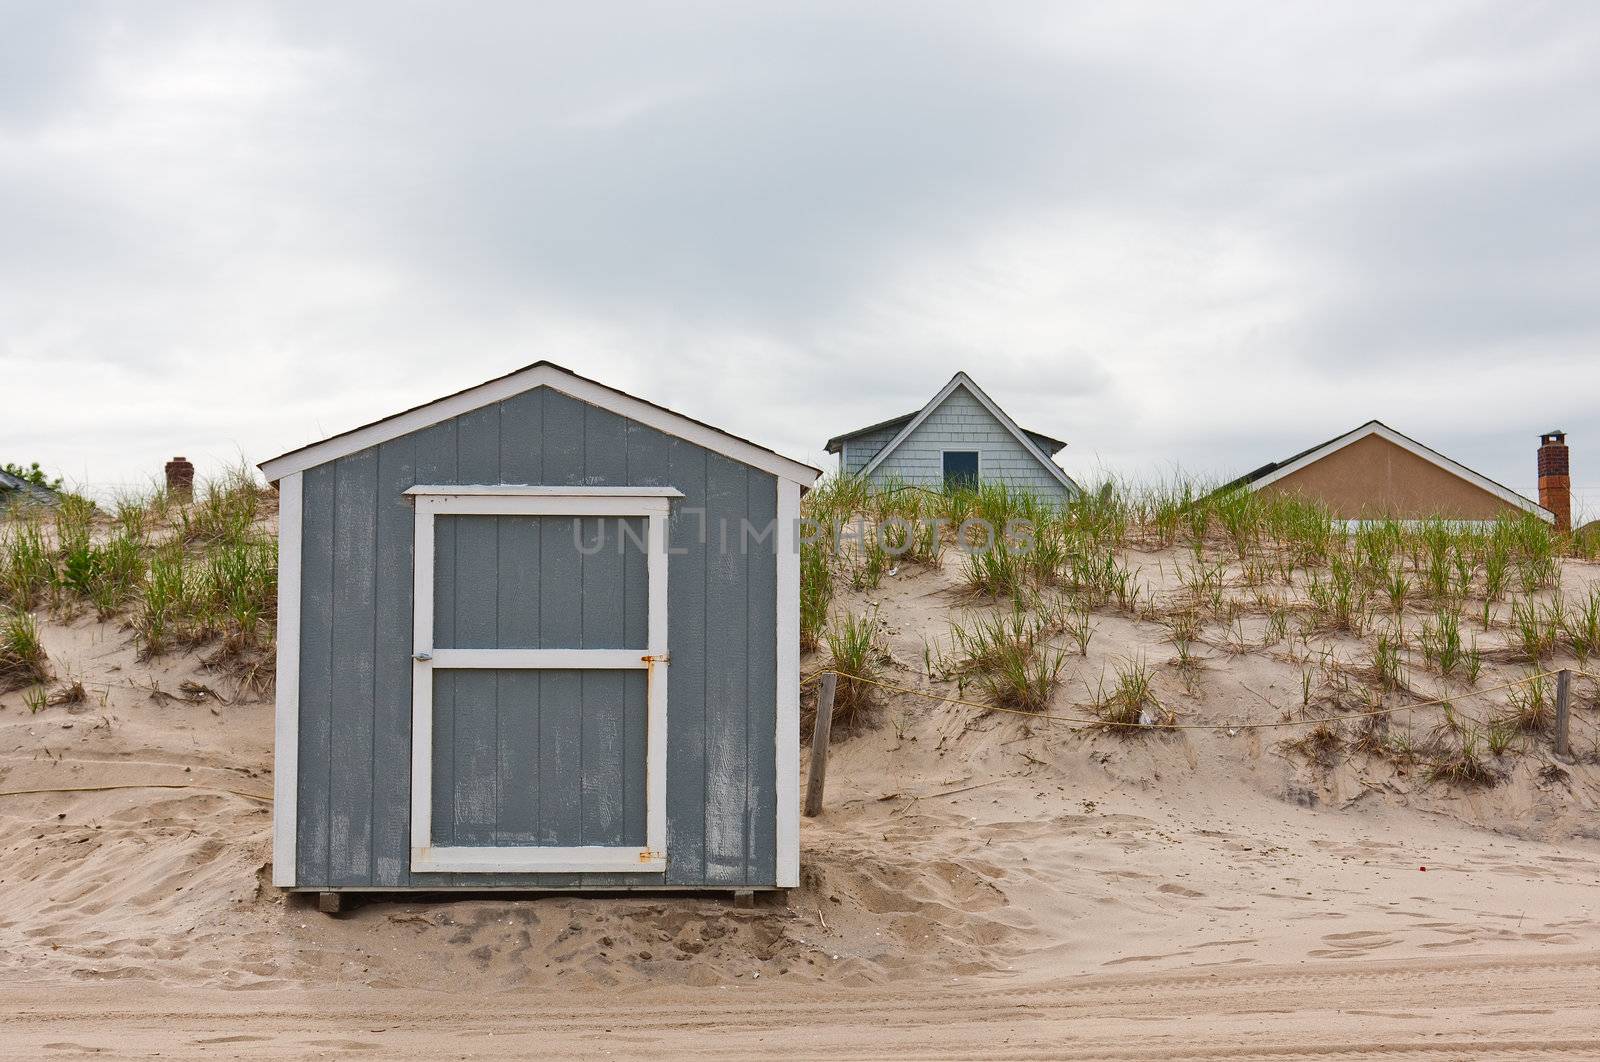 Storage Shed on Beach by sbonk